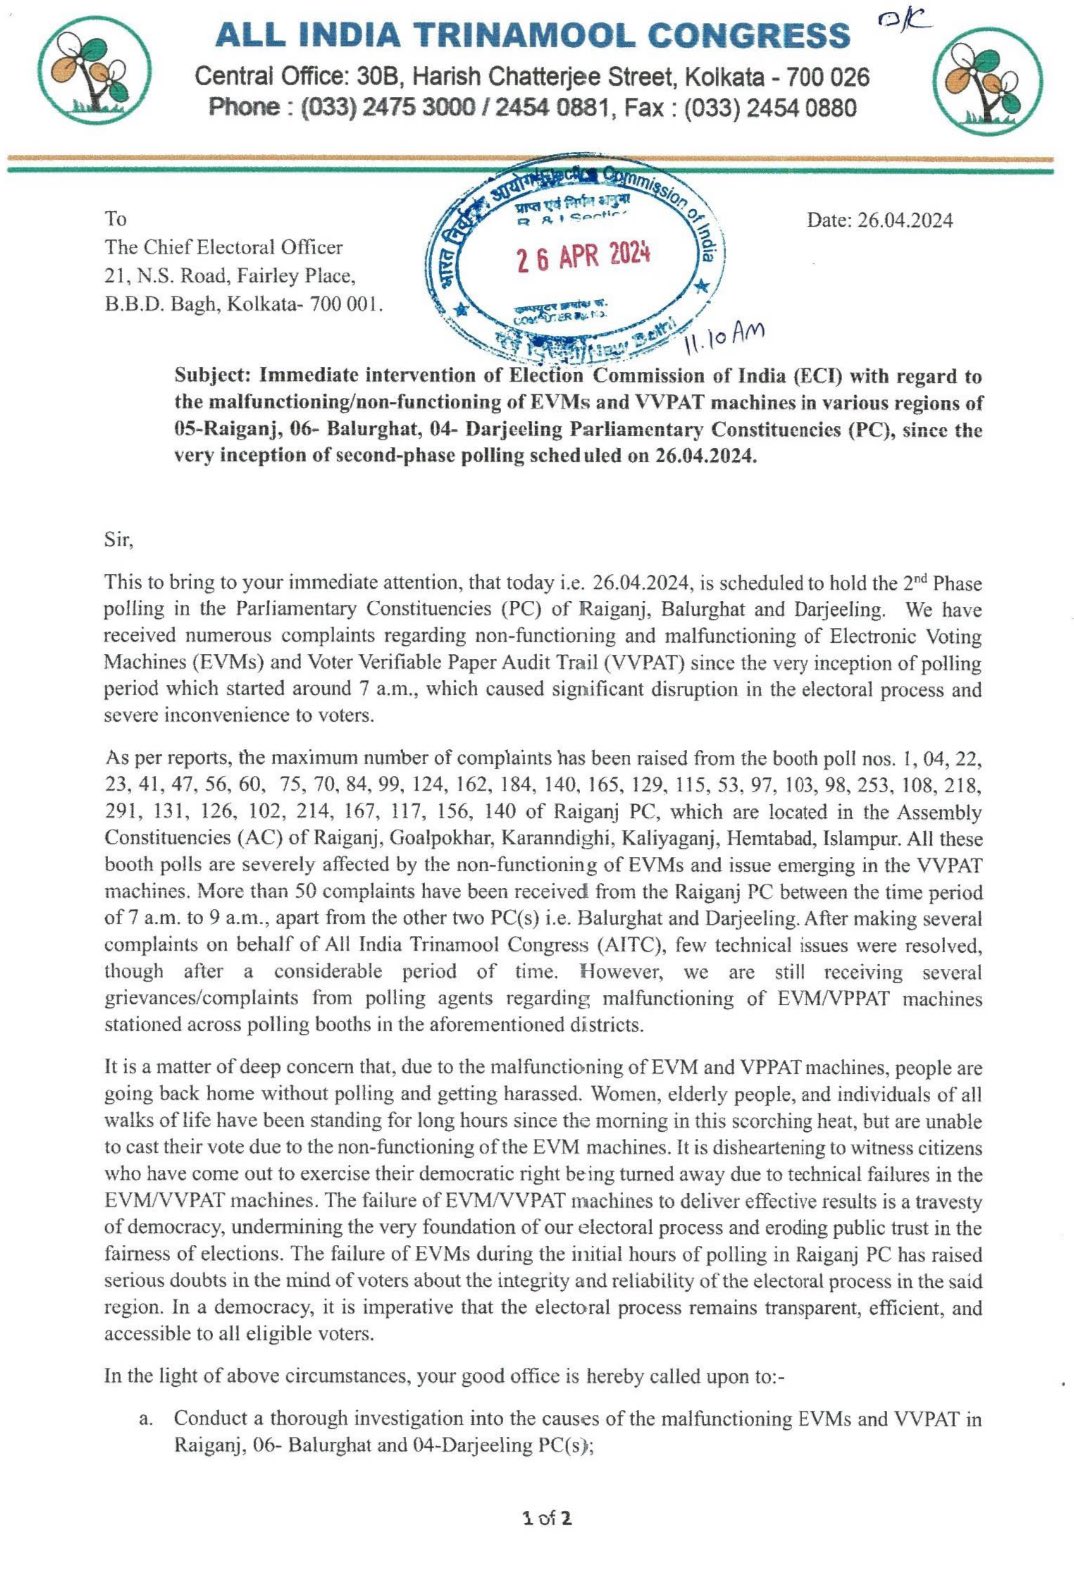 photo: a letter to ECI regarding the malfunctioning of EVMs and VVPAT machines